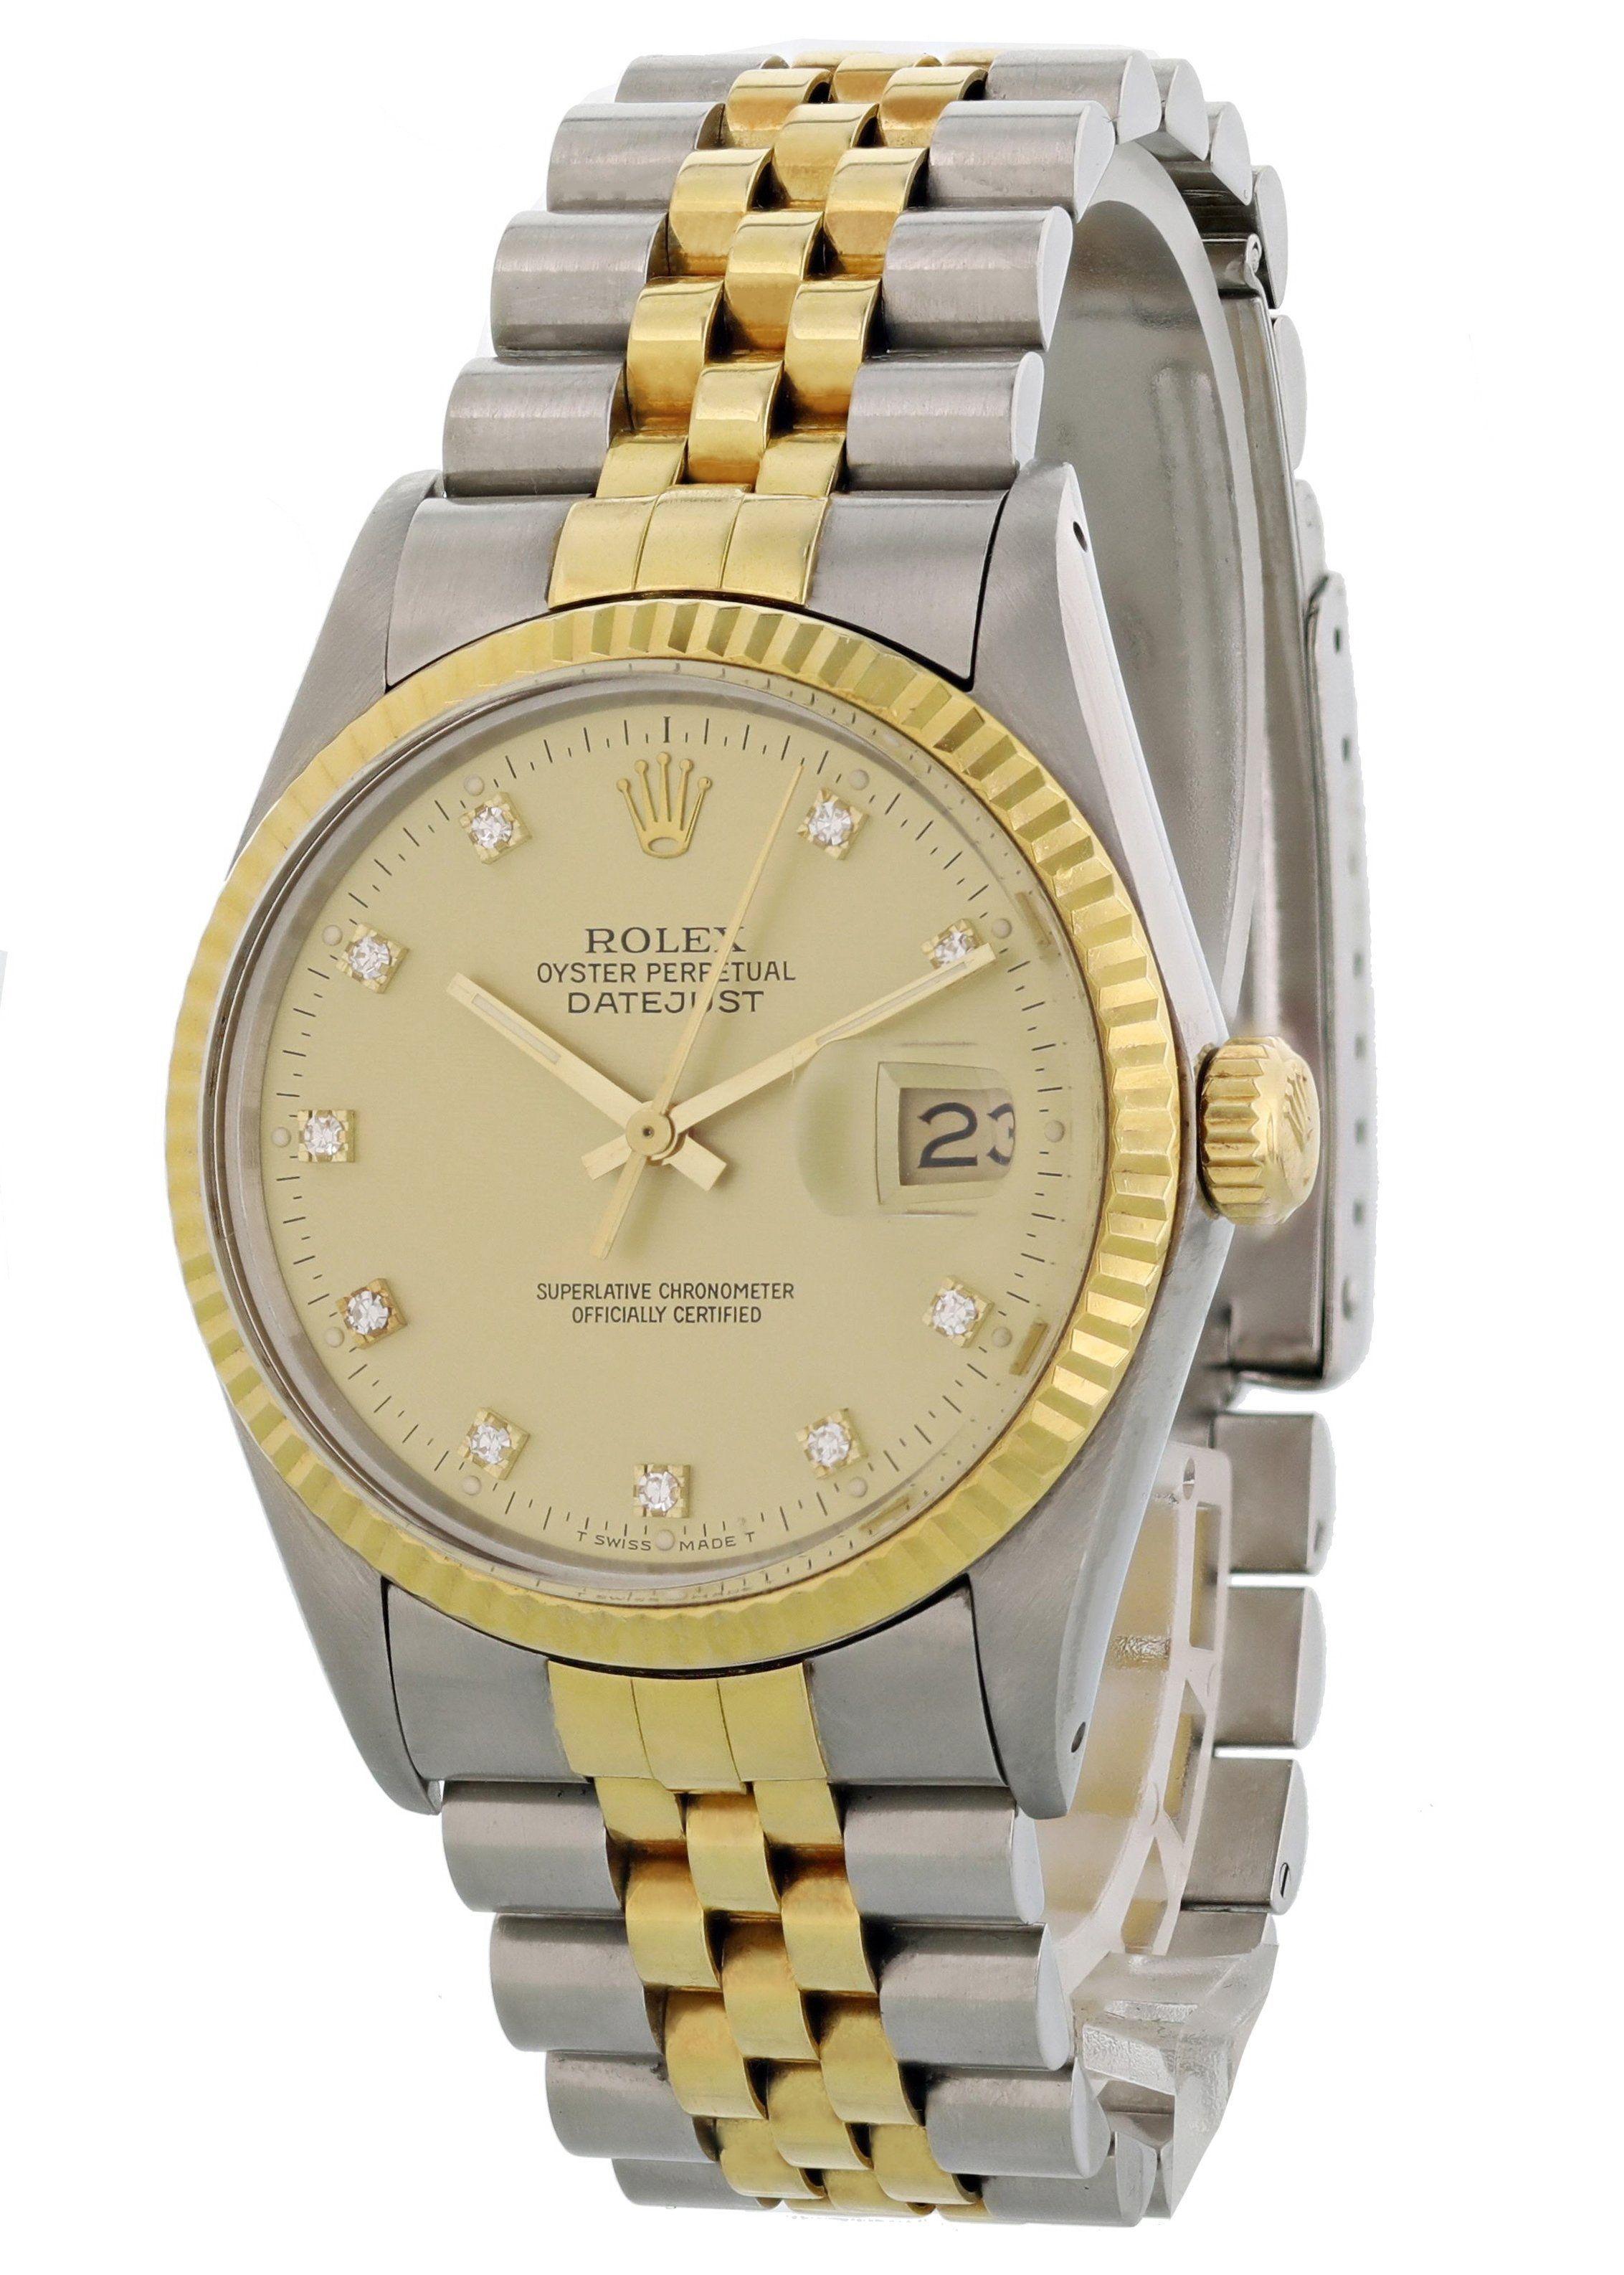 Rolex Oyster Perpetual Datejust 16013 Mens Watch. Stainless steel 36mm case. 18k yellow gold fluted bezel. Champagne diamond dial with gold hands and stick index markers. Date display at the 3 o'clock position. 18k yellow gold and stainless steel